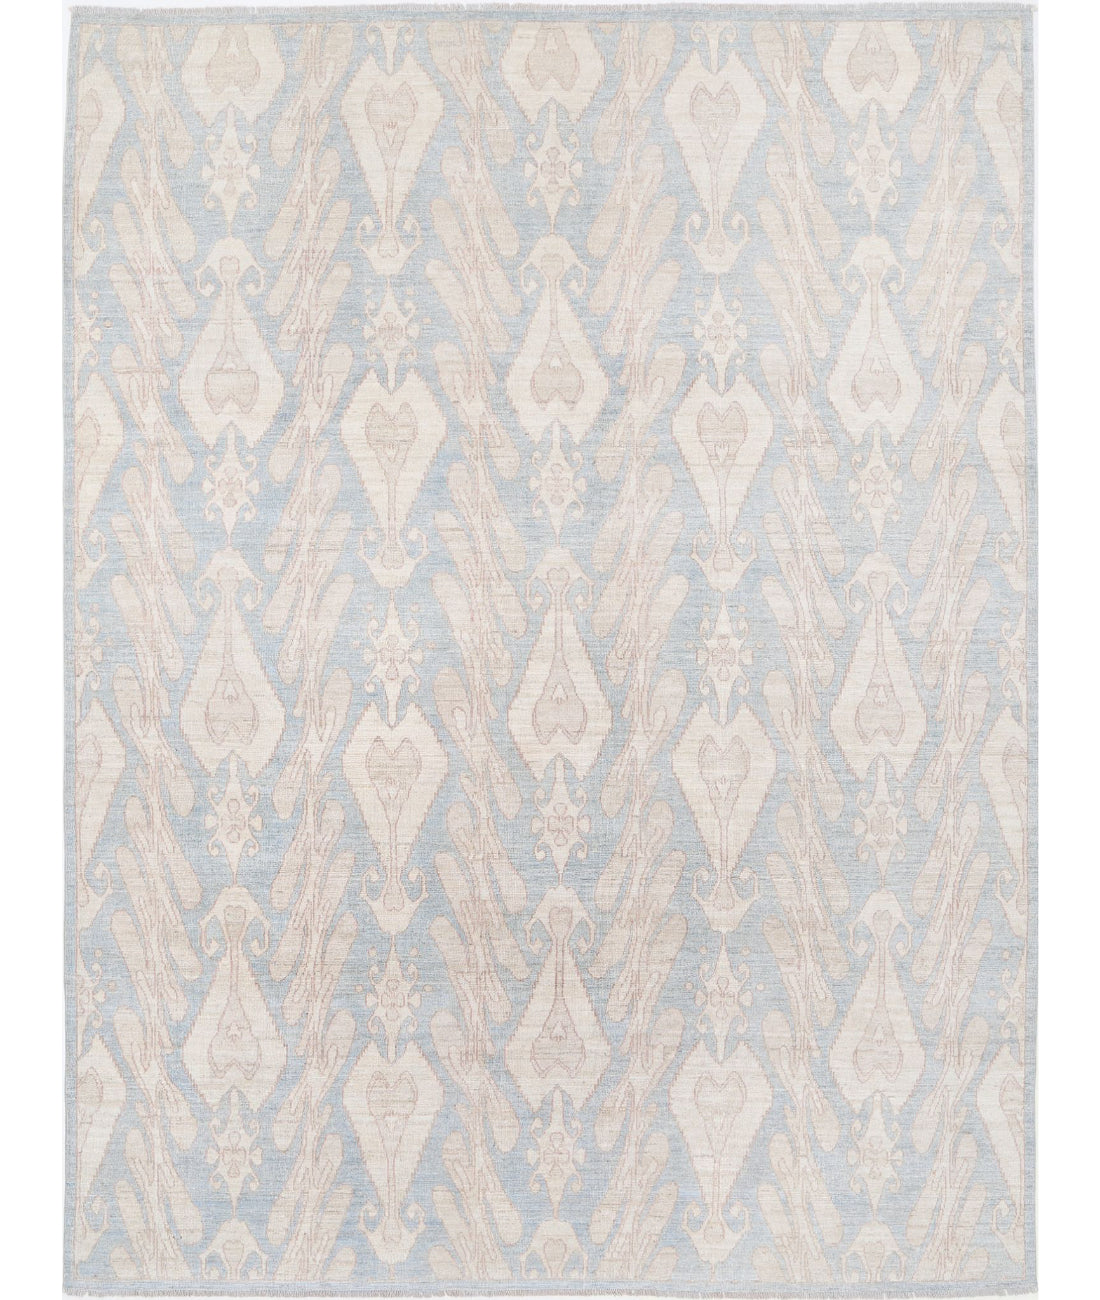 Hand Knotted Ikat Wool Rug - 8'8'' x 11'6'' 8'8'' x 11'6'' (260 X 345) / Blue / Ivory